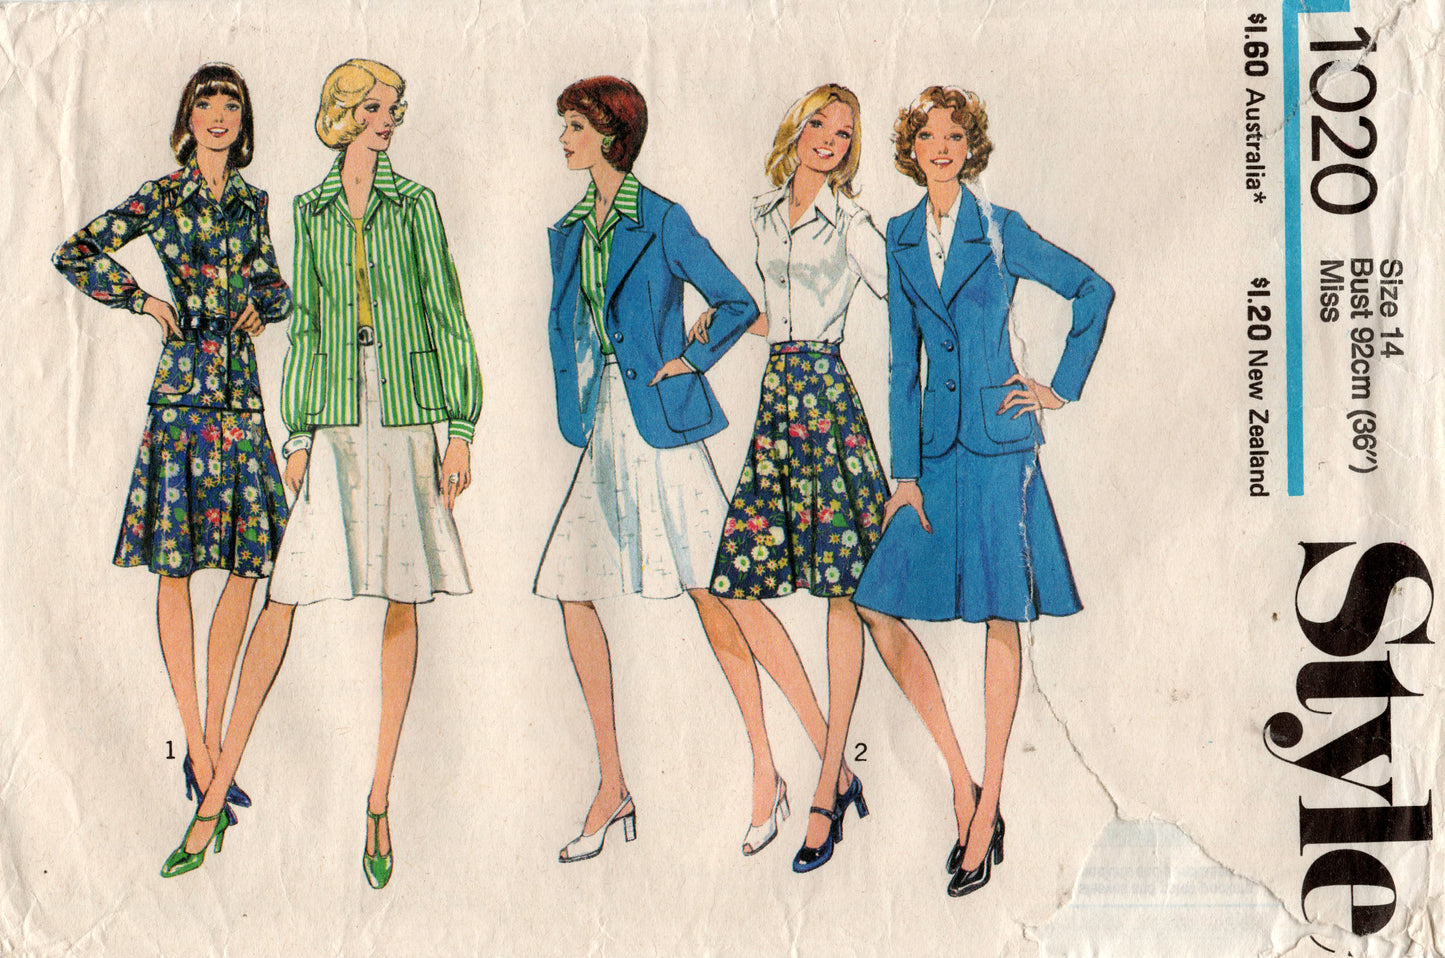 Style 1020 Womens Blouse Jacket & Skirt 1970s Vintage Sewing Pattern Size 14 Bust 36 inches